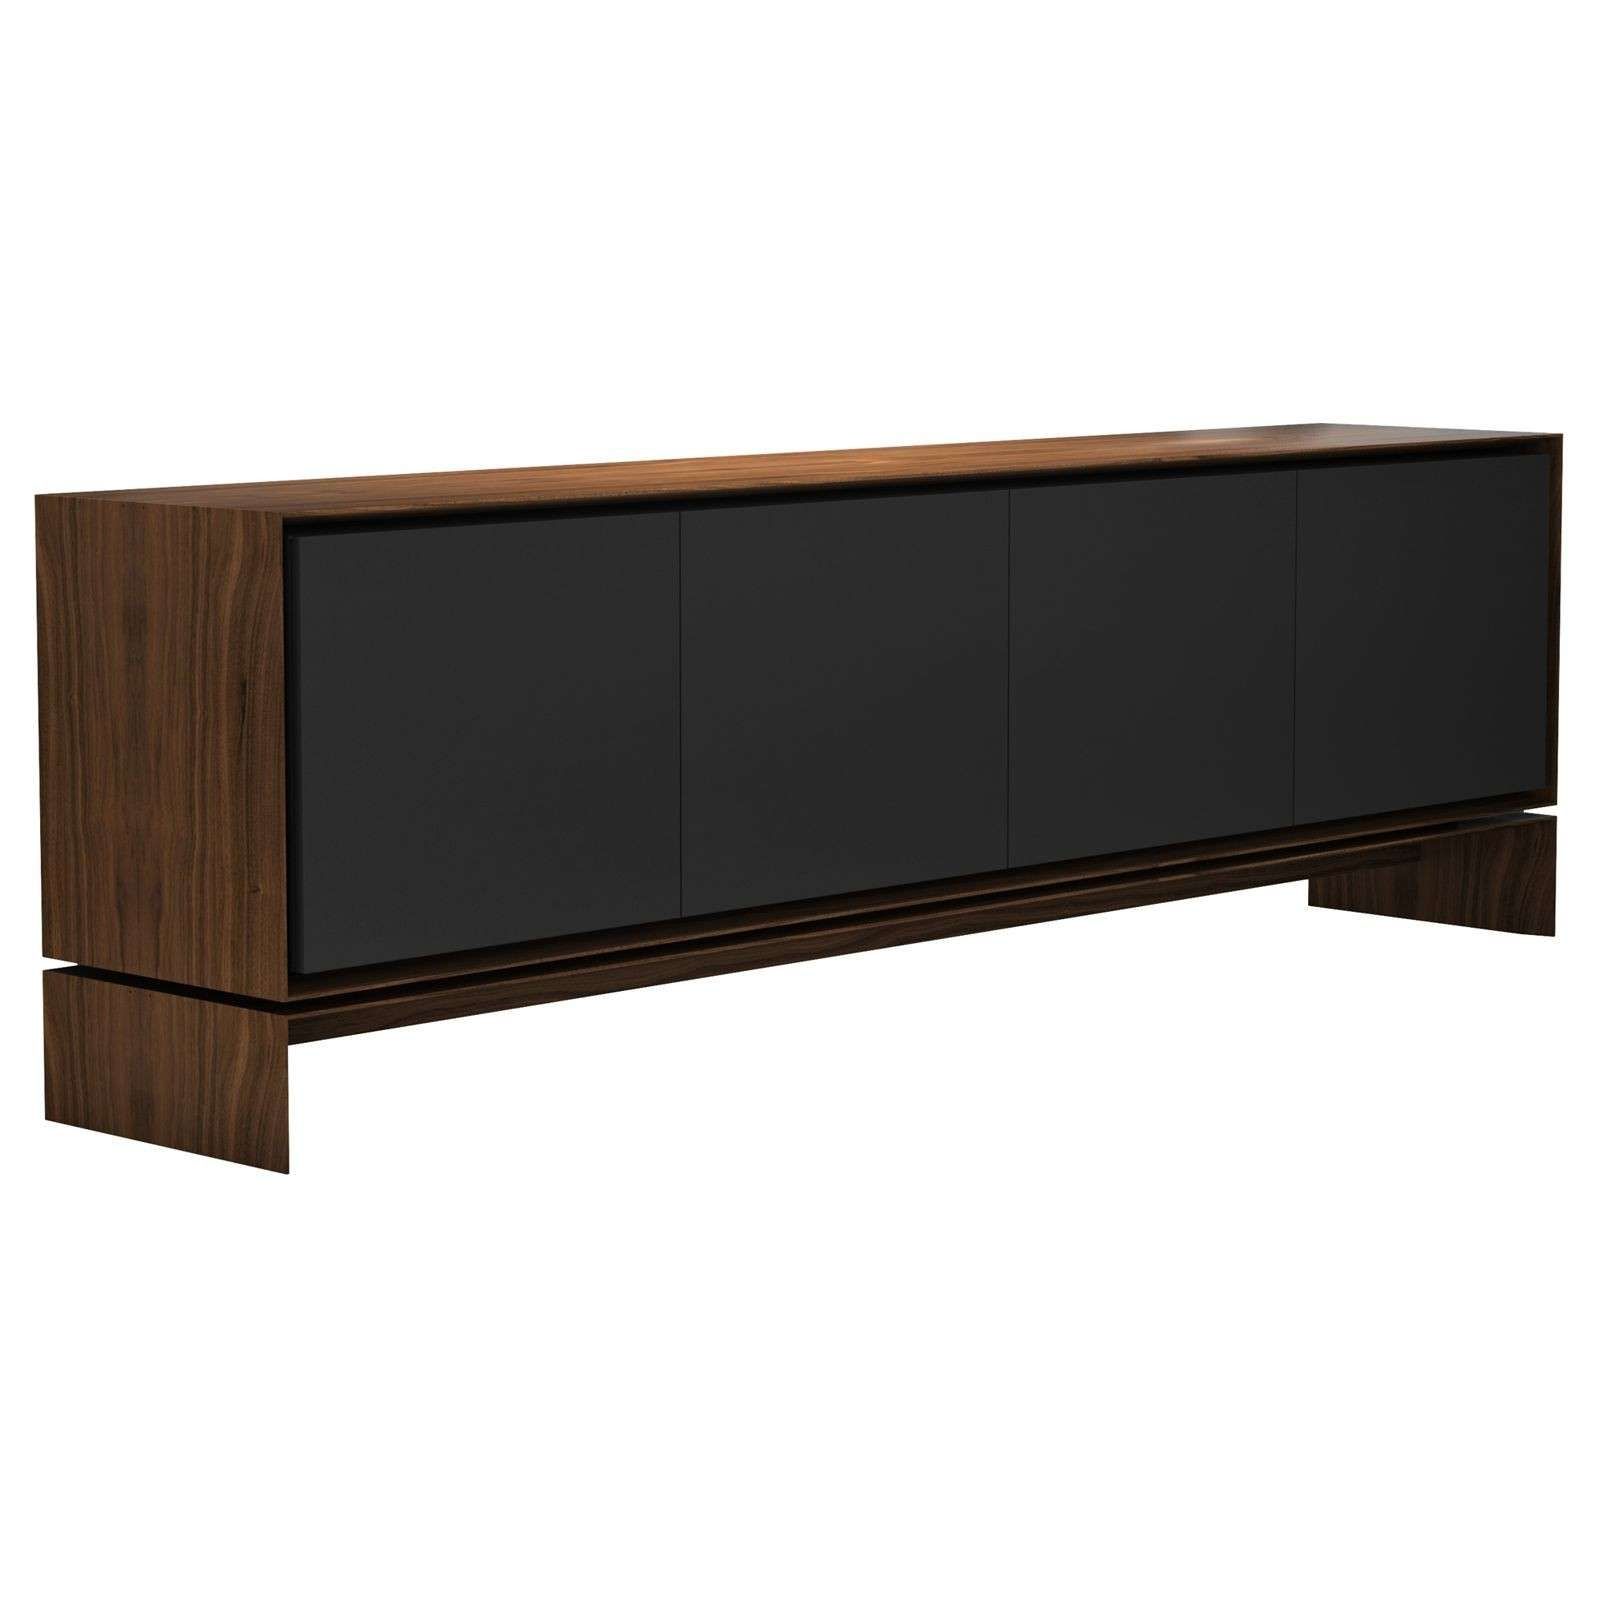 Modern Sideboards – Contemporary Sideboards | Cressina In Modern Sideboards (Gallery 20 of 20)